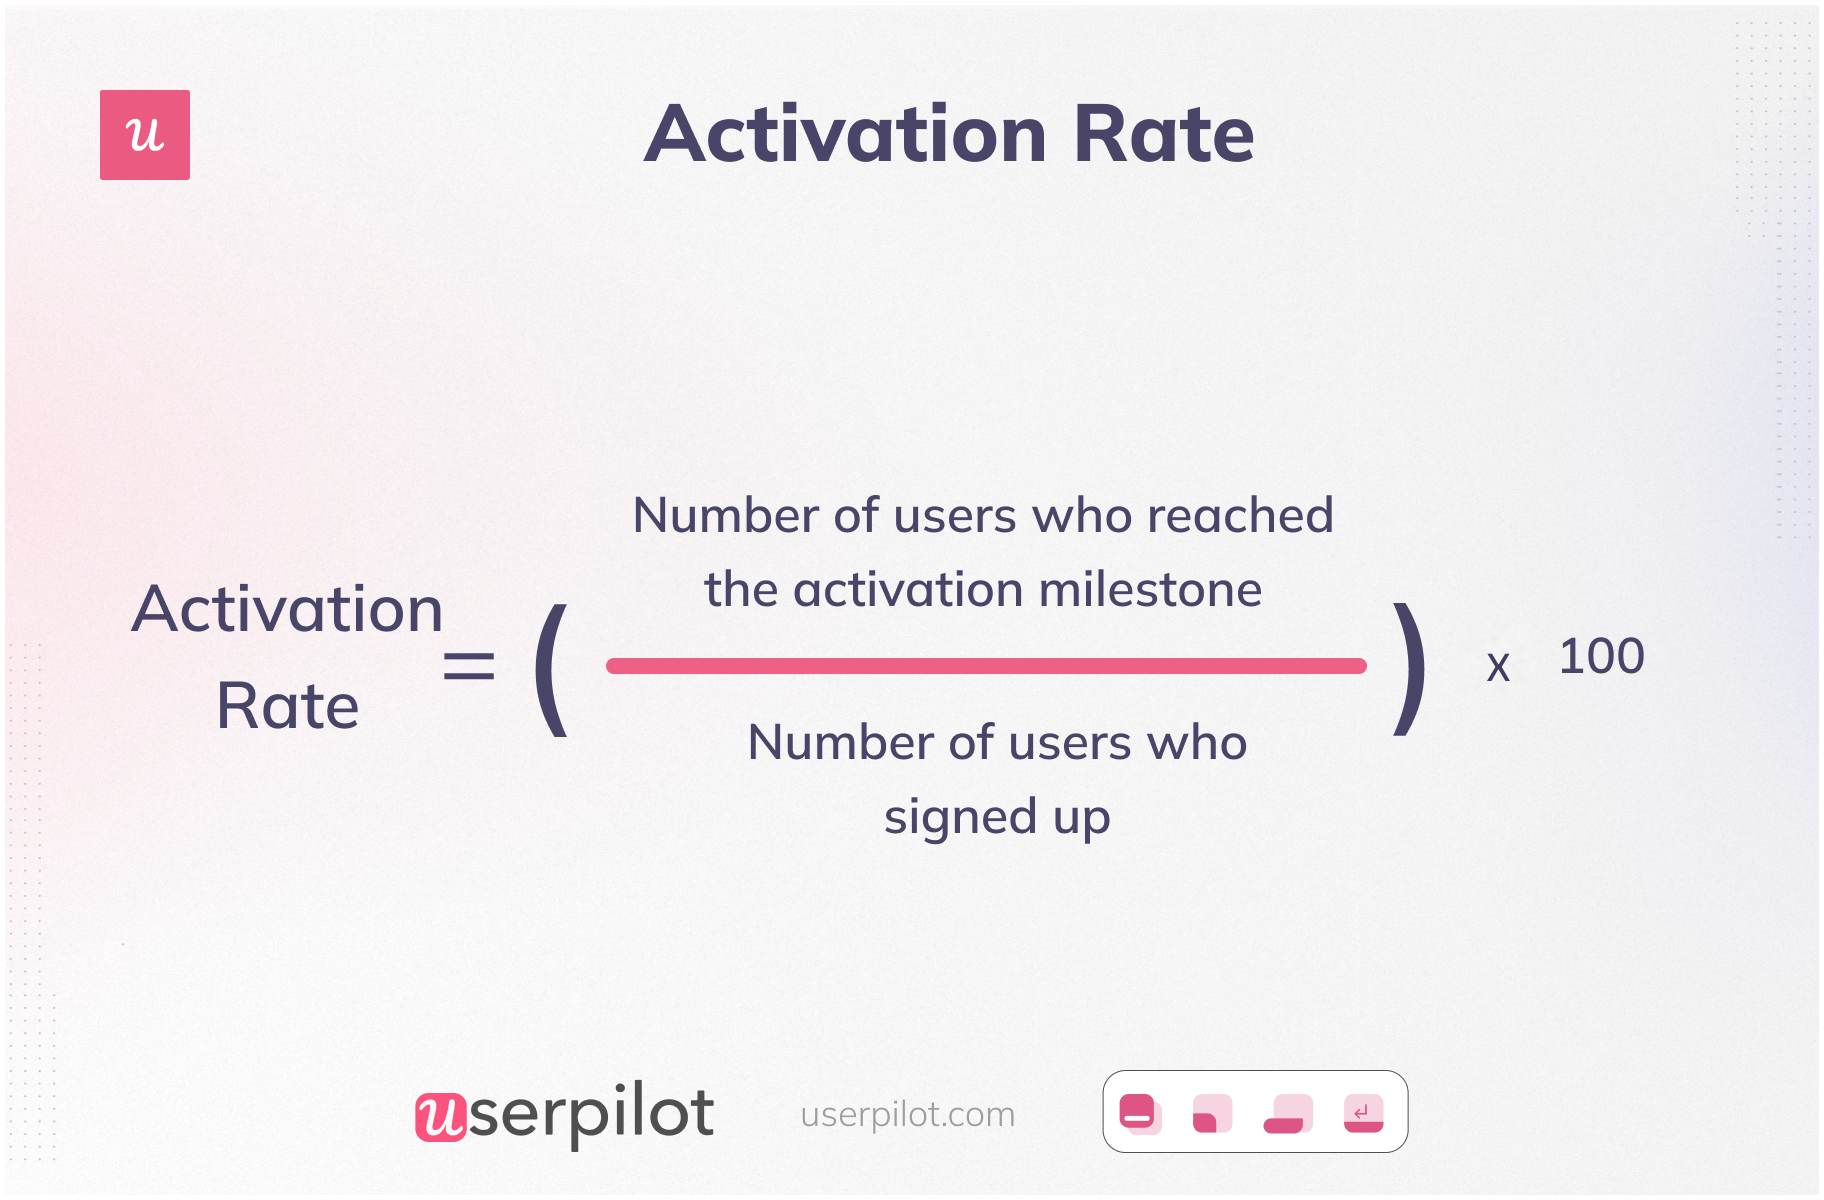 How to calculate activation rate